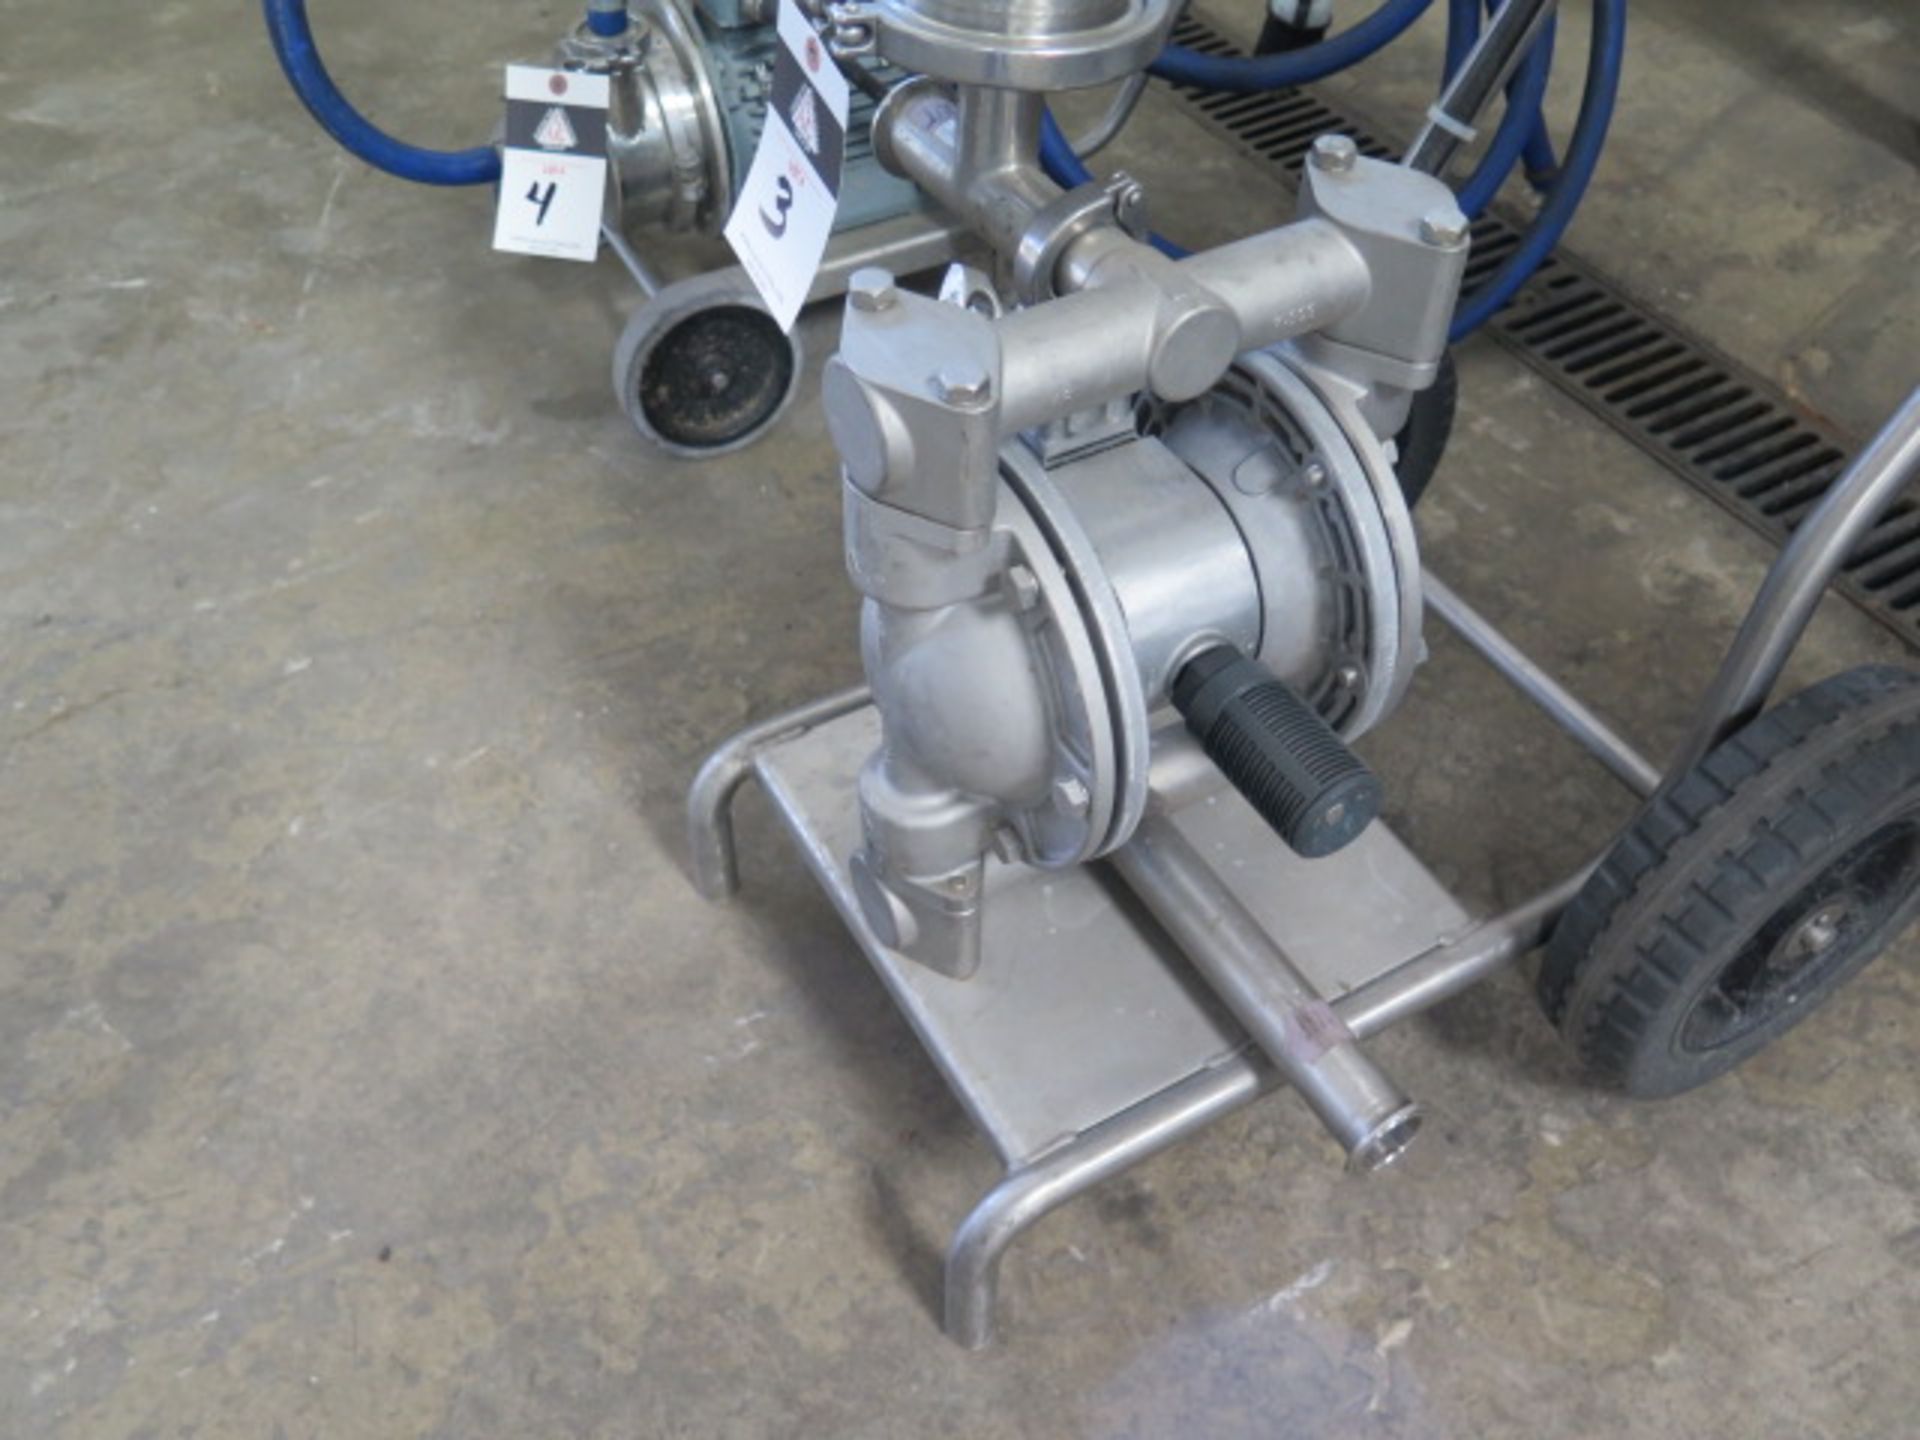 2019 Yamada NDP-25BSH-CAR Pneumatic Diaphragm Pump w/ Cart (SOLD AS-IS - NO WARRANTY) - Image 2 of 9